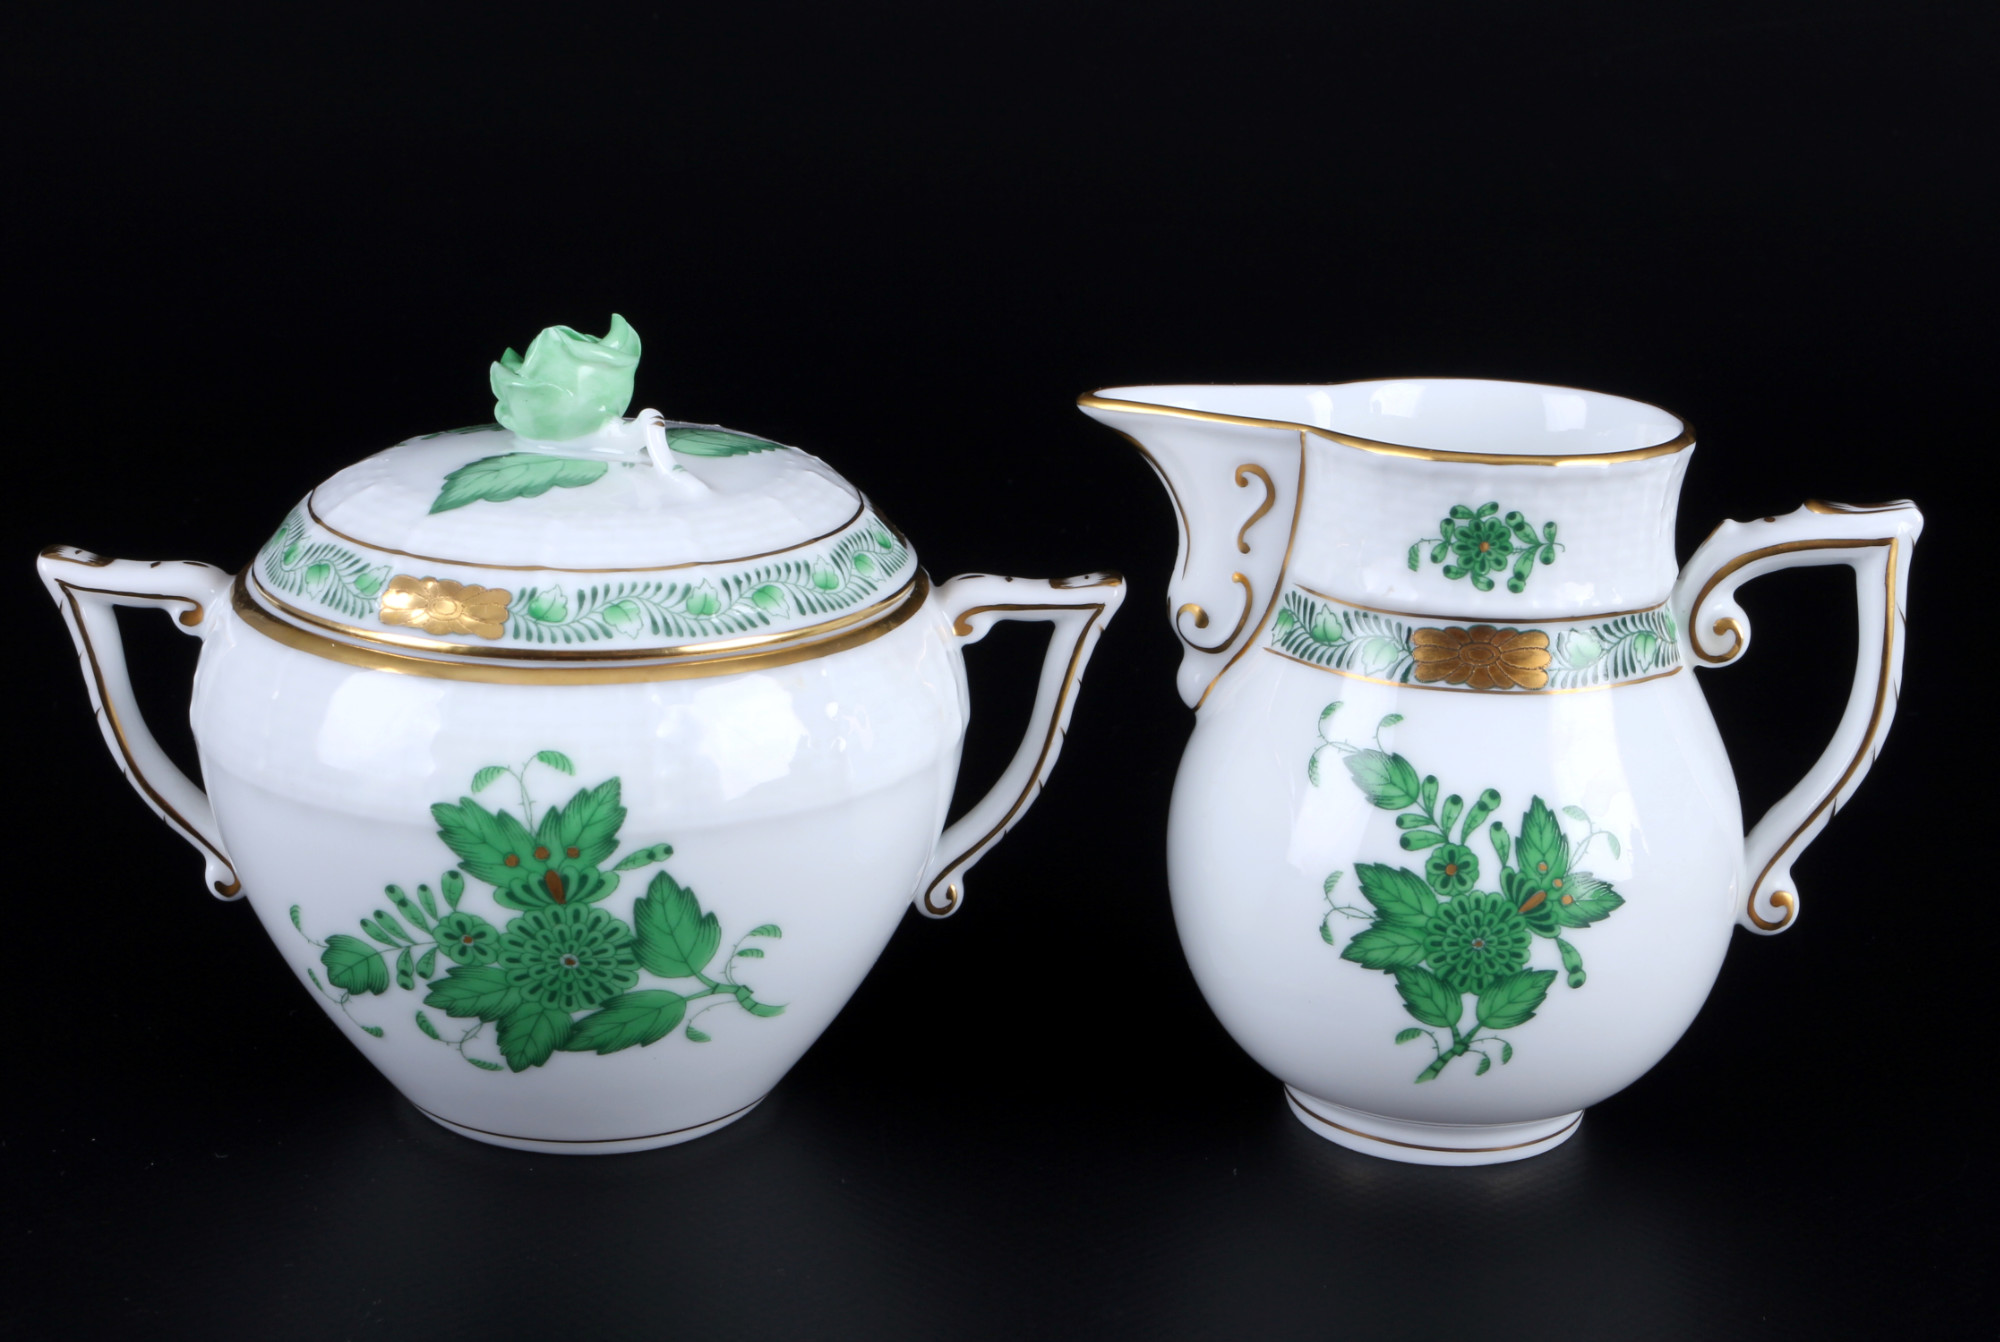 Herend Apponyi Vert coffee service for 6 persons, Kaffeeservice für 6 Personen, - Image 4 of 8